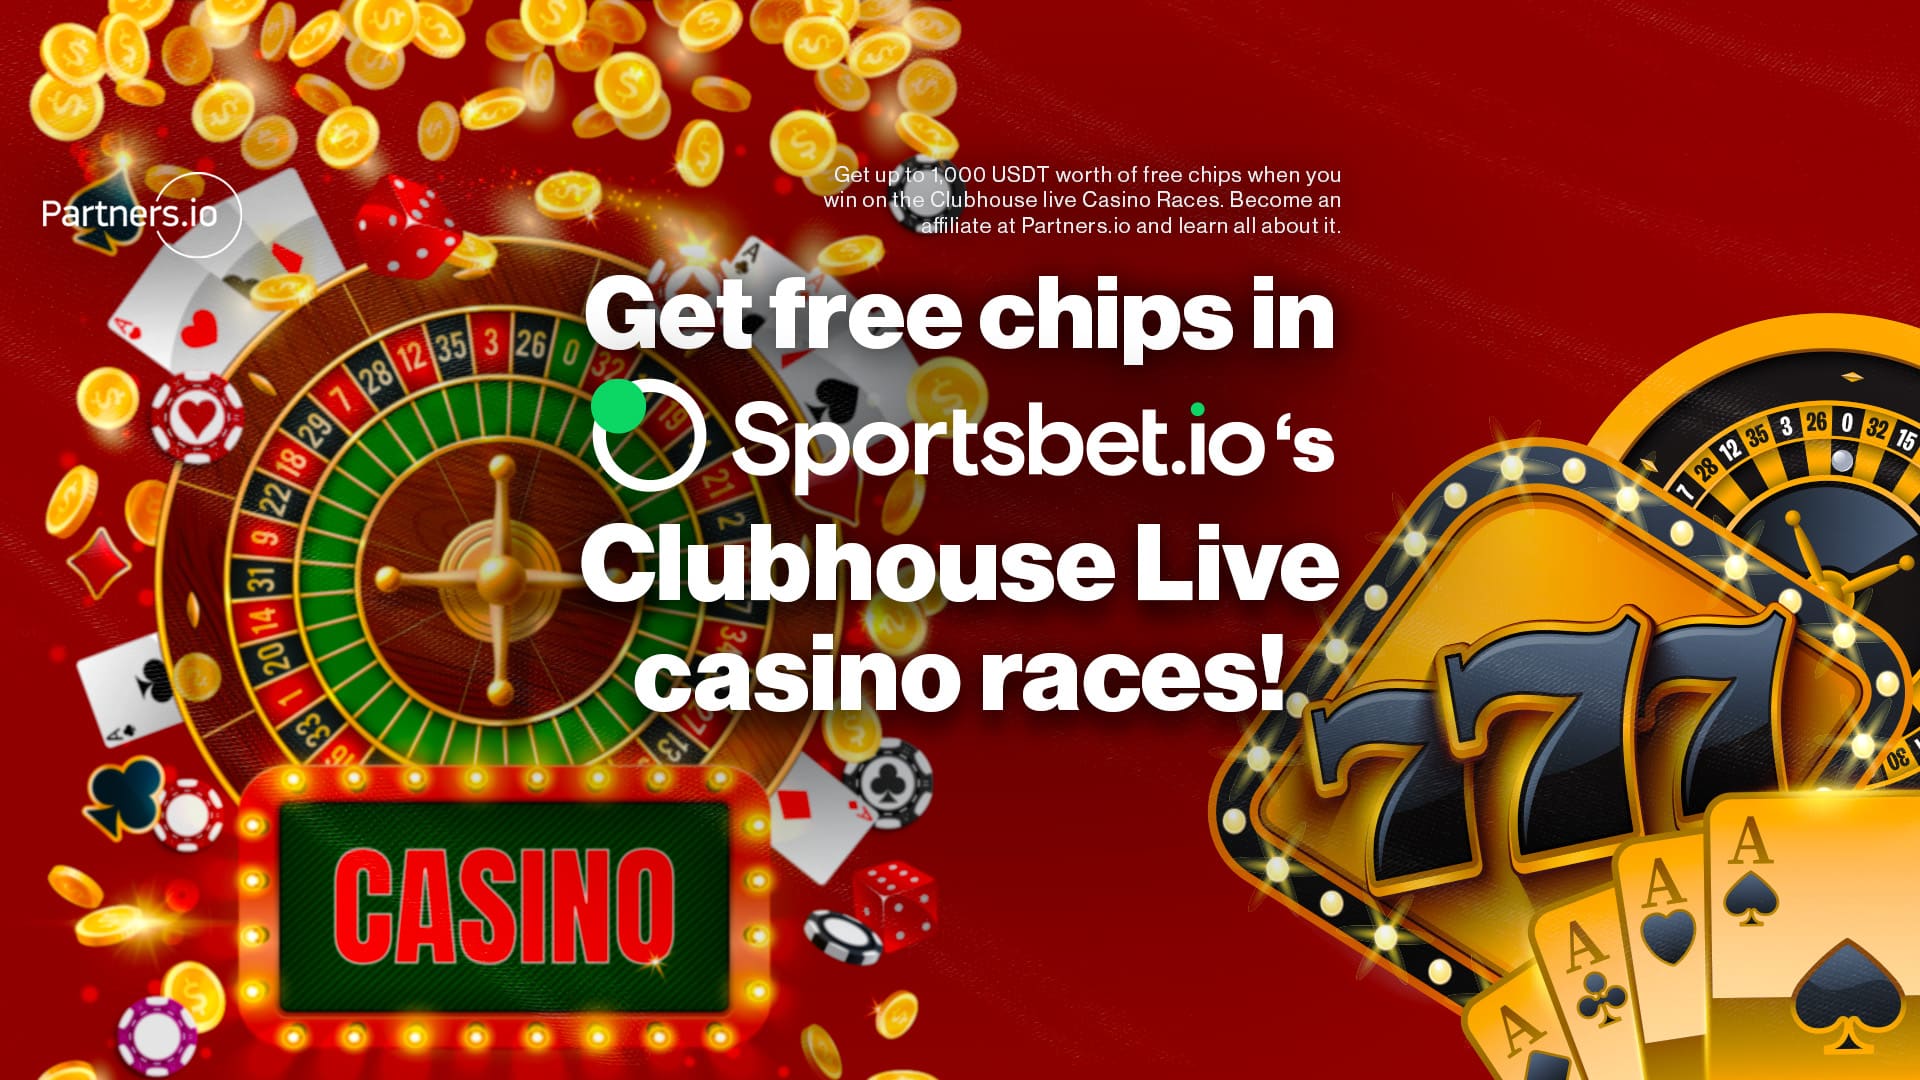 Get free chips in Sportsbet.io’s Clubhouse Live casino races!